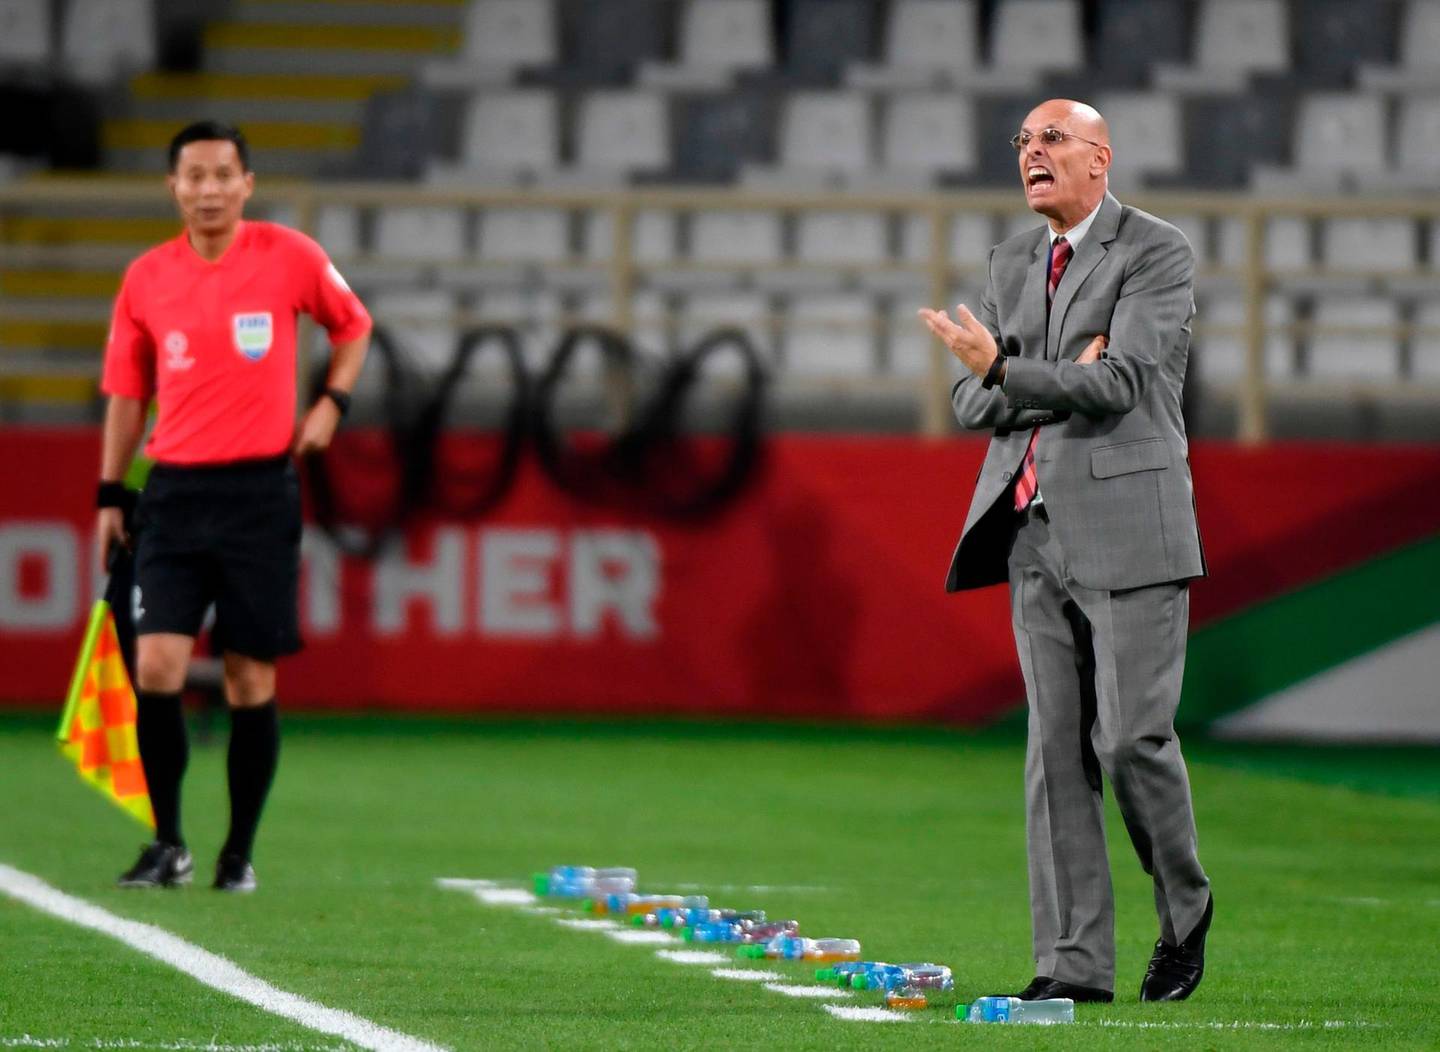 India's coach Stephen Constantine gives his instructions during the 2019 AFC Asian Cup Group A football game between Thailand and India at the Al Nahyan Stadium stadium in Abu Dhabi on January 6, 2019. / AFP / Khaled DESOUKI
